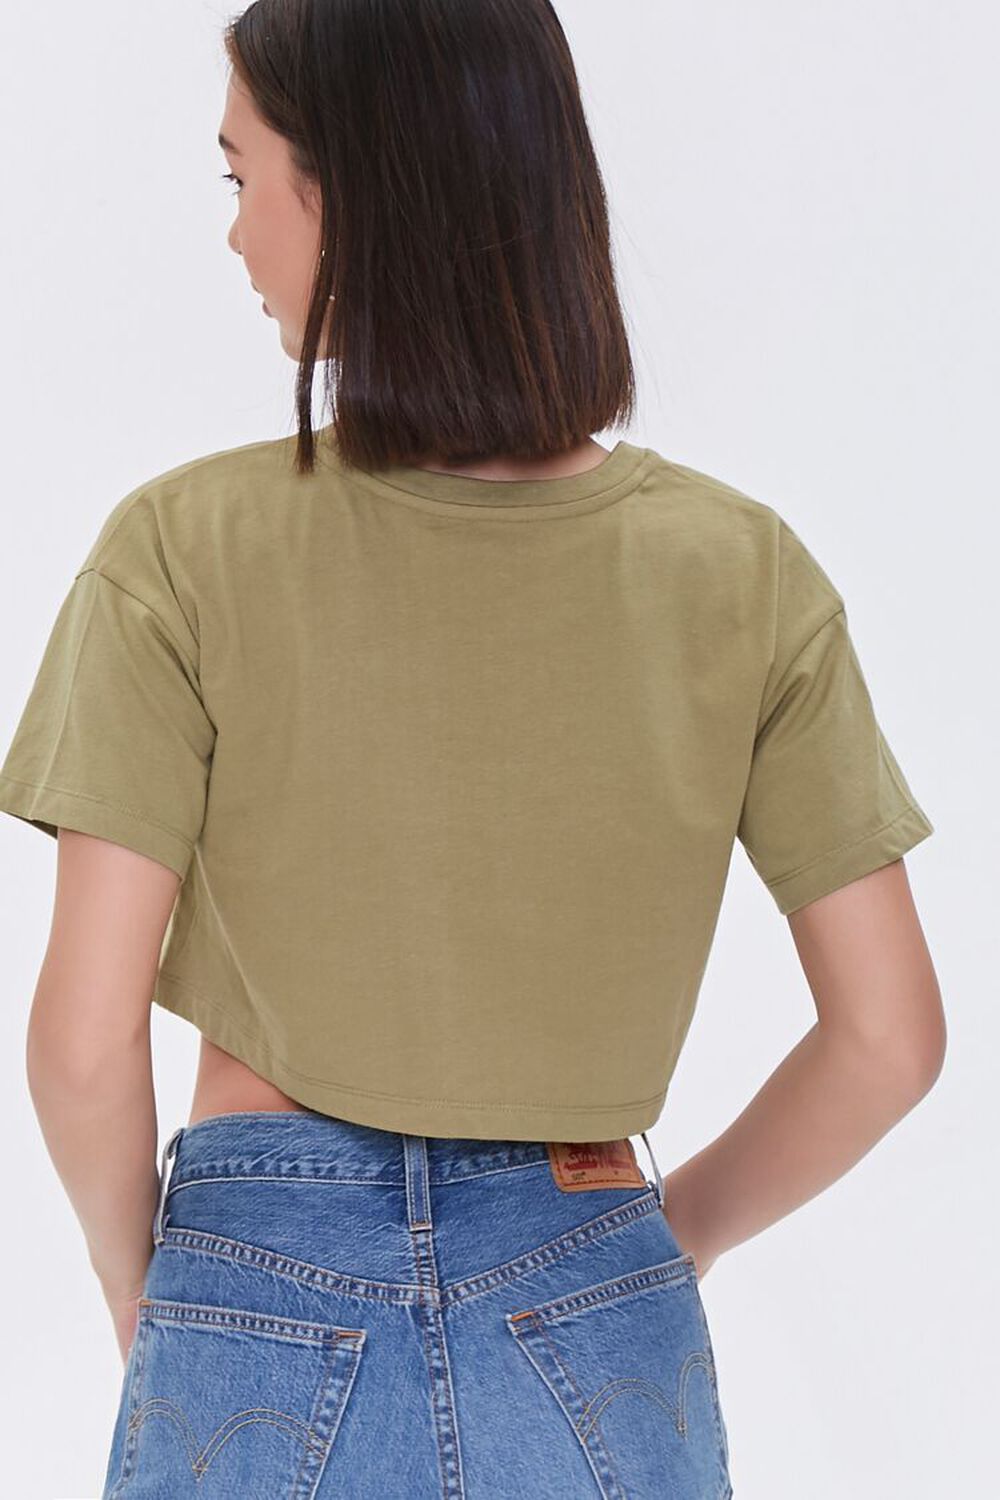 LIGHT OLIVE Cropped Crew Tee, image 3